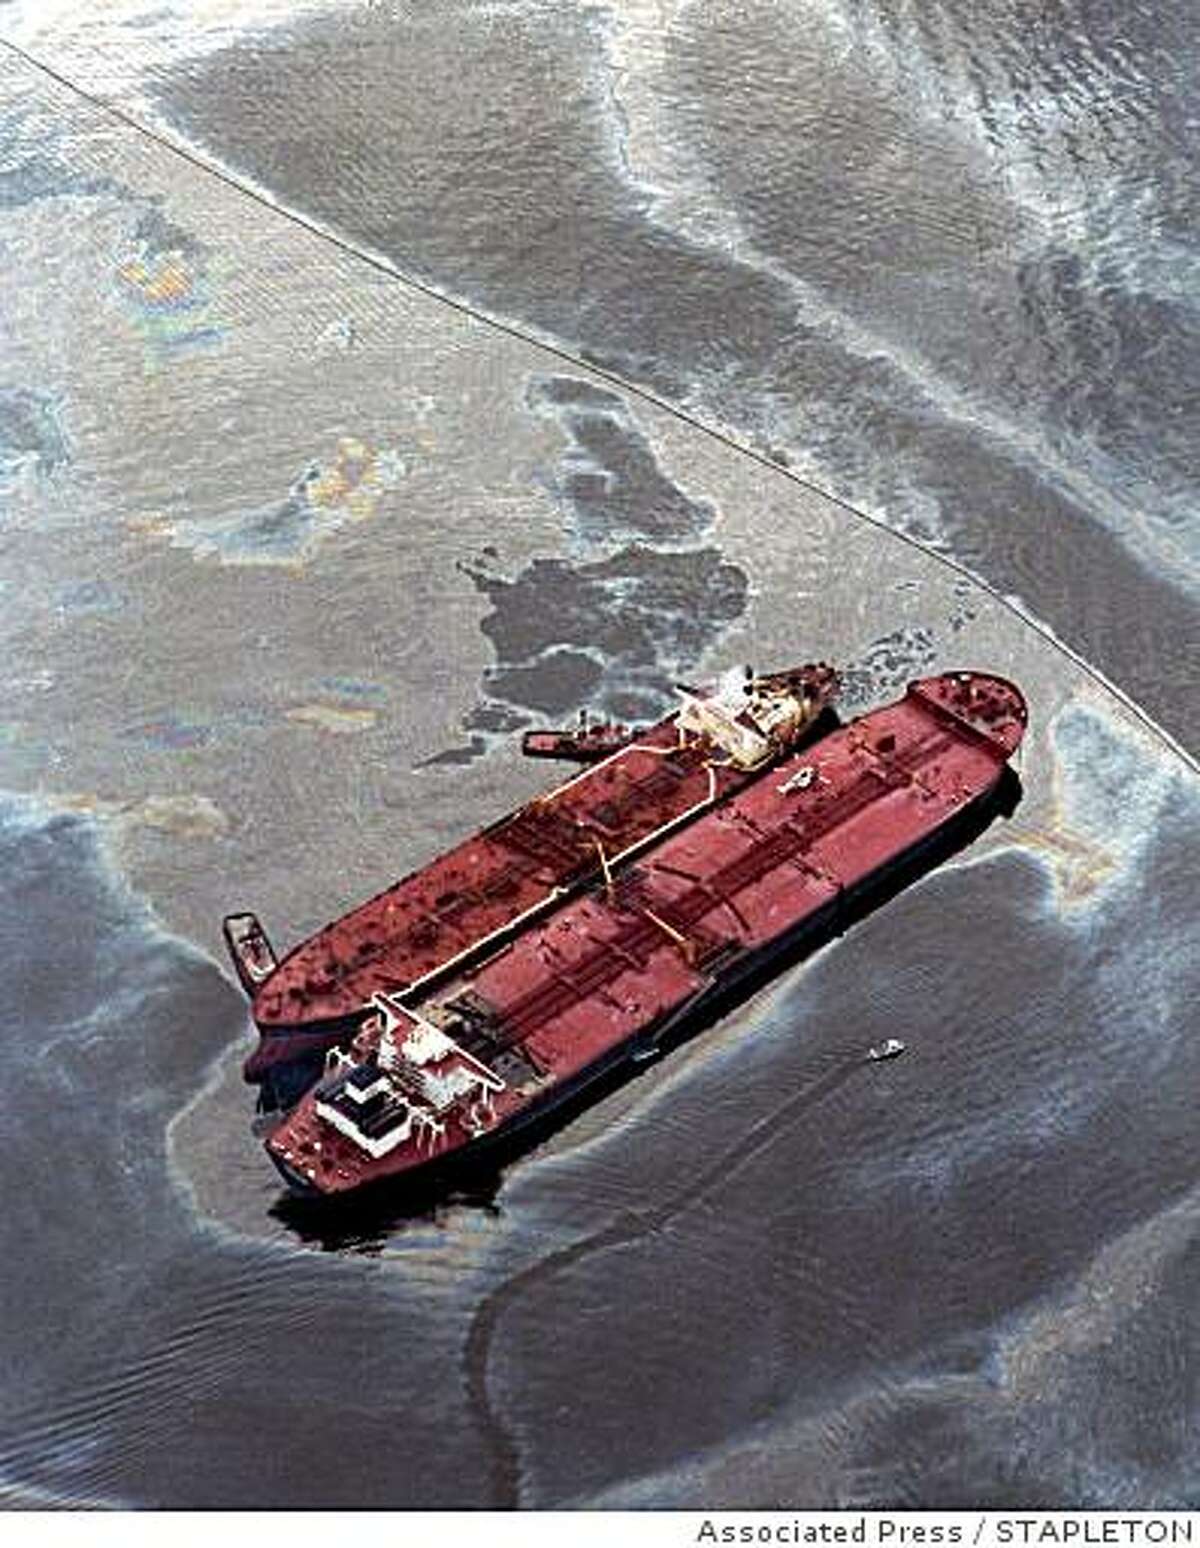 The smaller Exxon Baton Rouge attempts to off-load crude oil March 26,1989, from the Exxon Valdez, aground in Alaska's Prince William Sound. The tanker spilled 11 million gallons of crude in America's worst oil spill. (AP Photo/Stapleton)